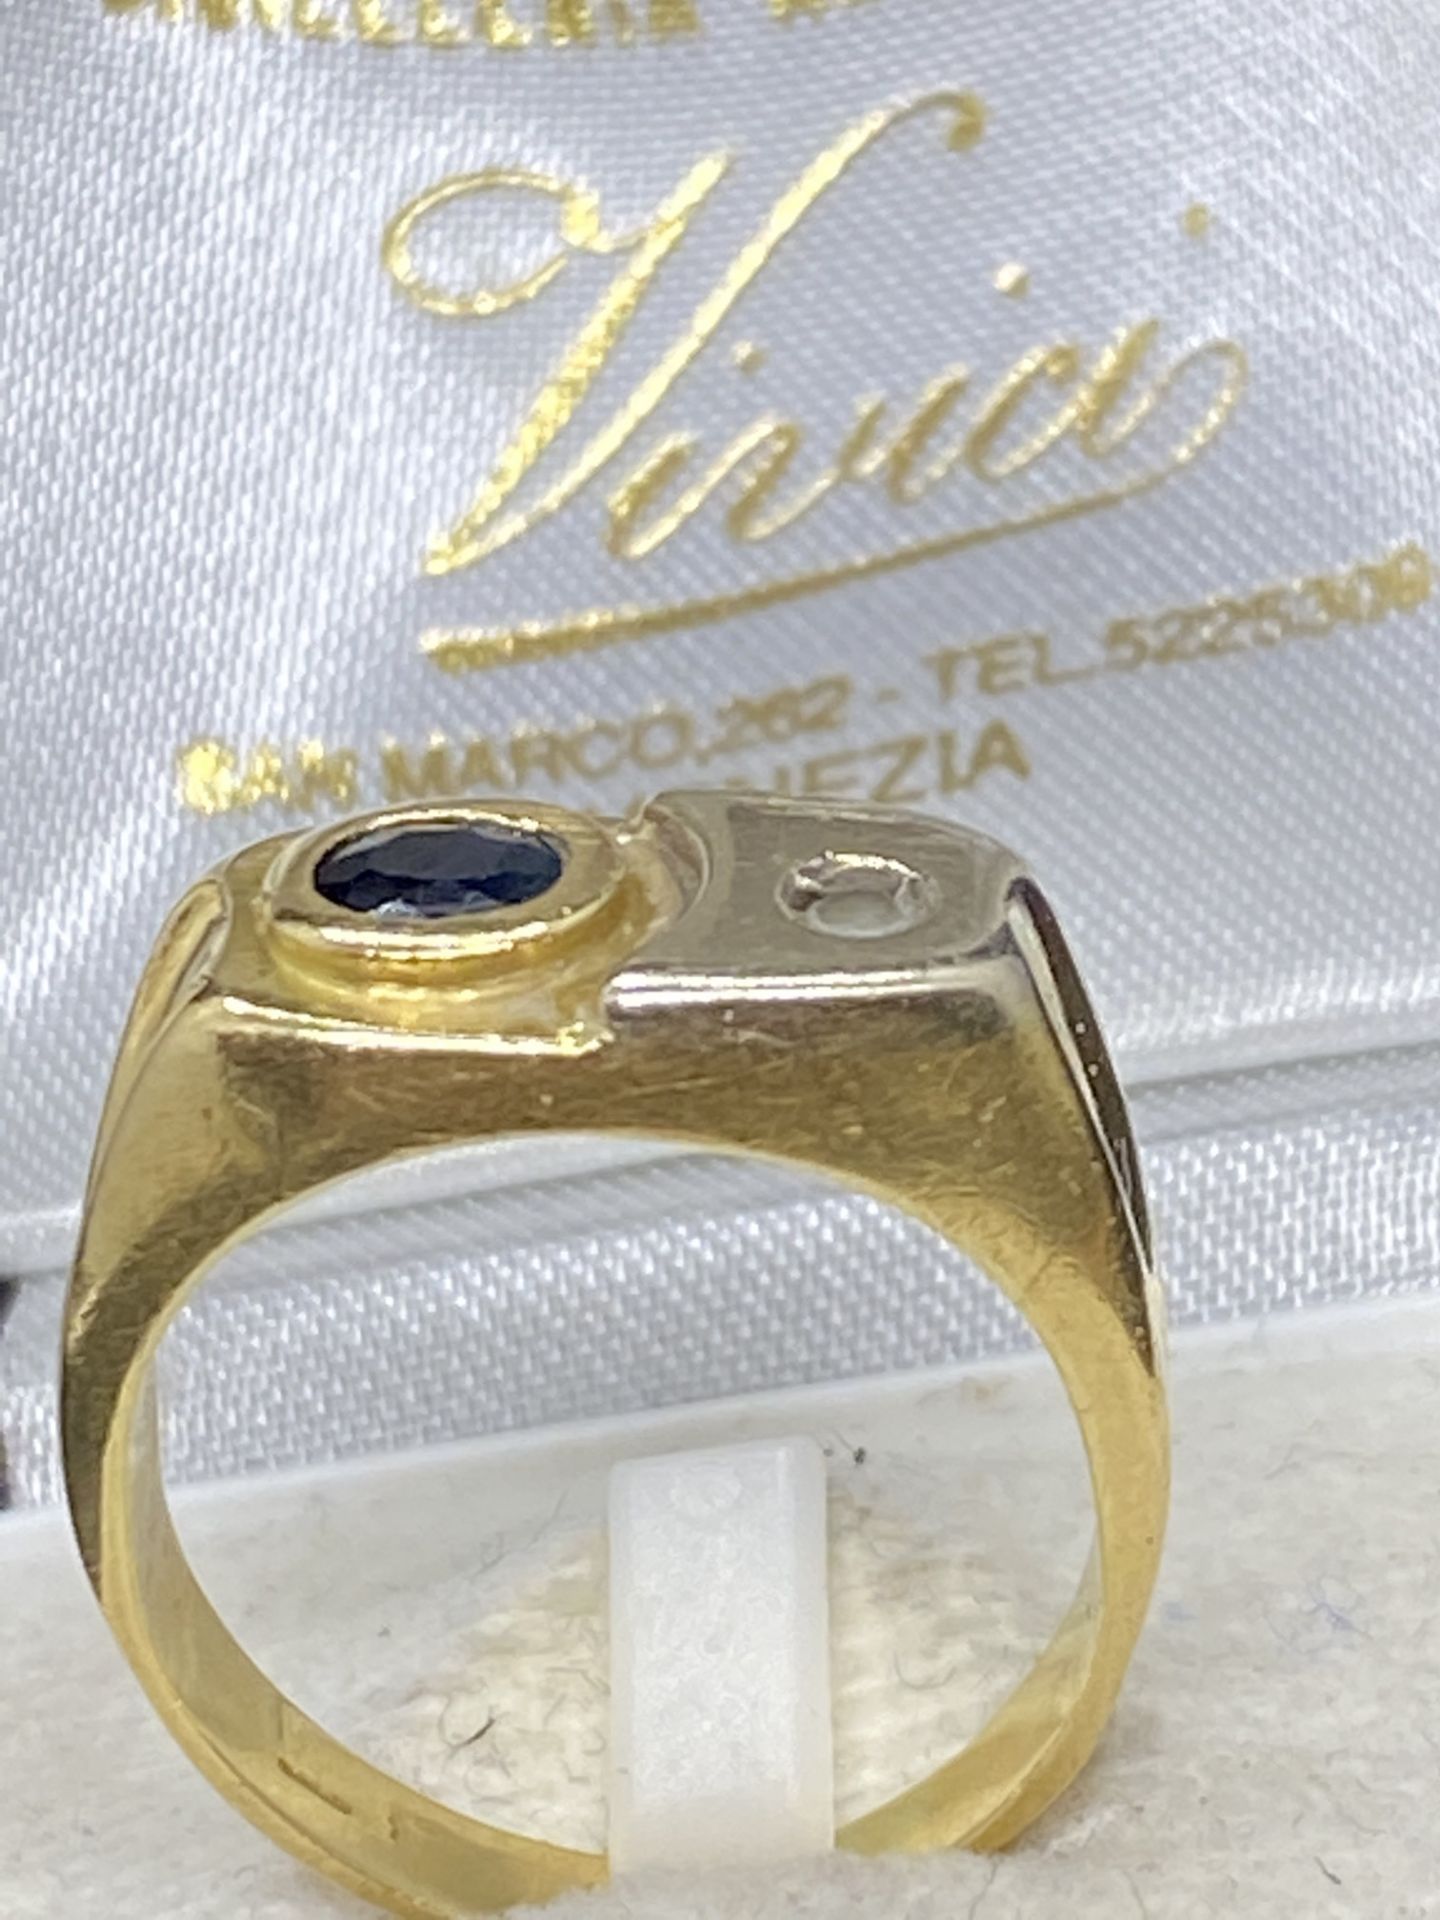 SAPPHIRE & DIAMOND RING TESTED AS 18ct GOLD 7.8 GRAMS - Image 2 of 4